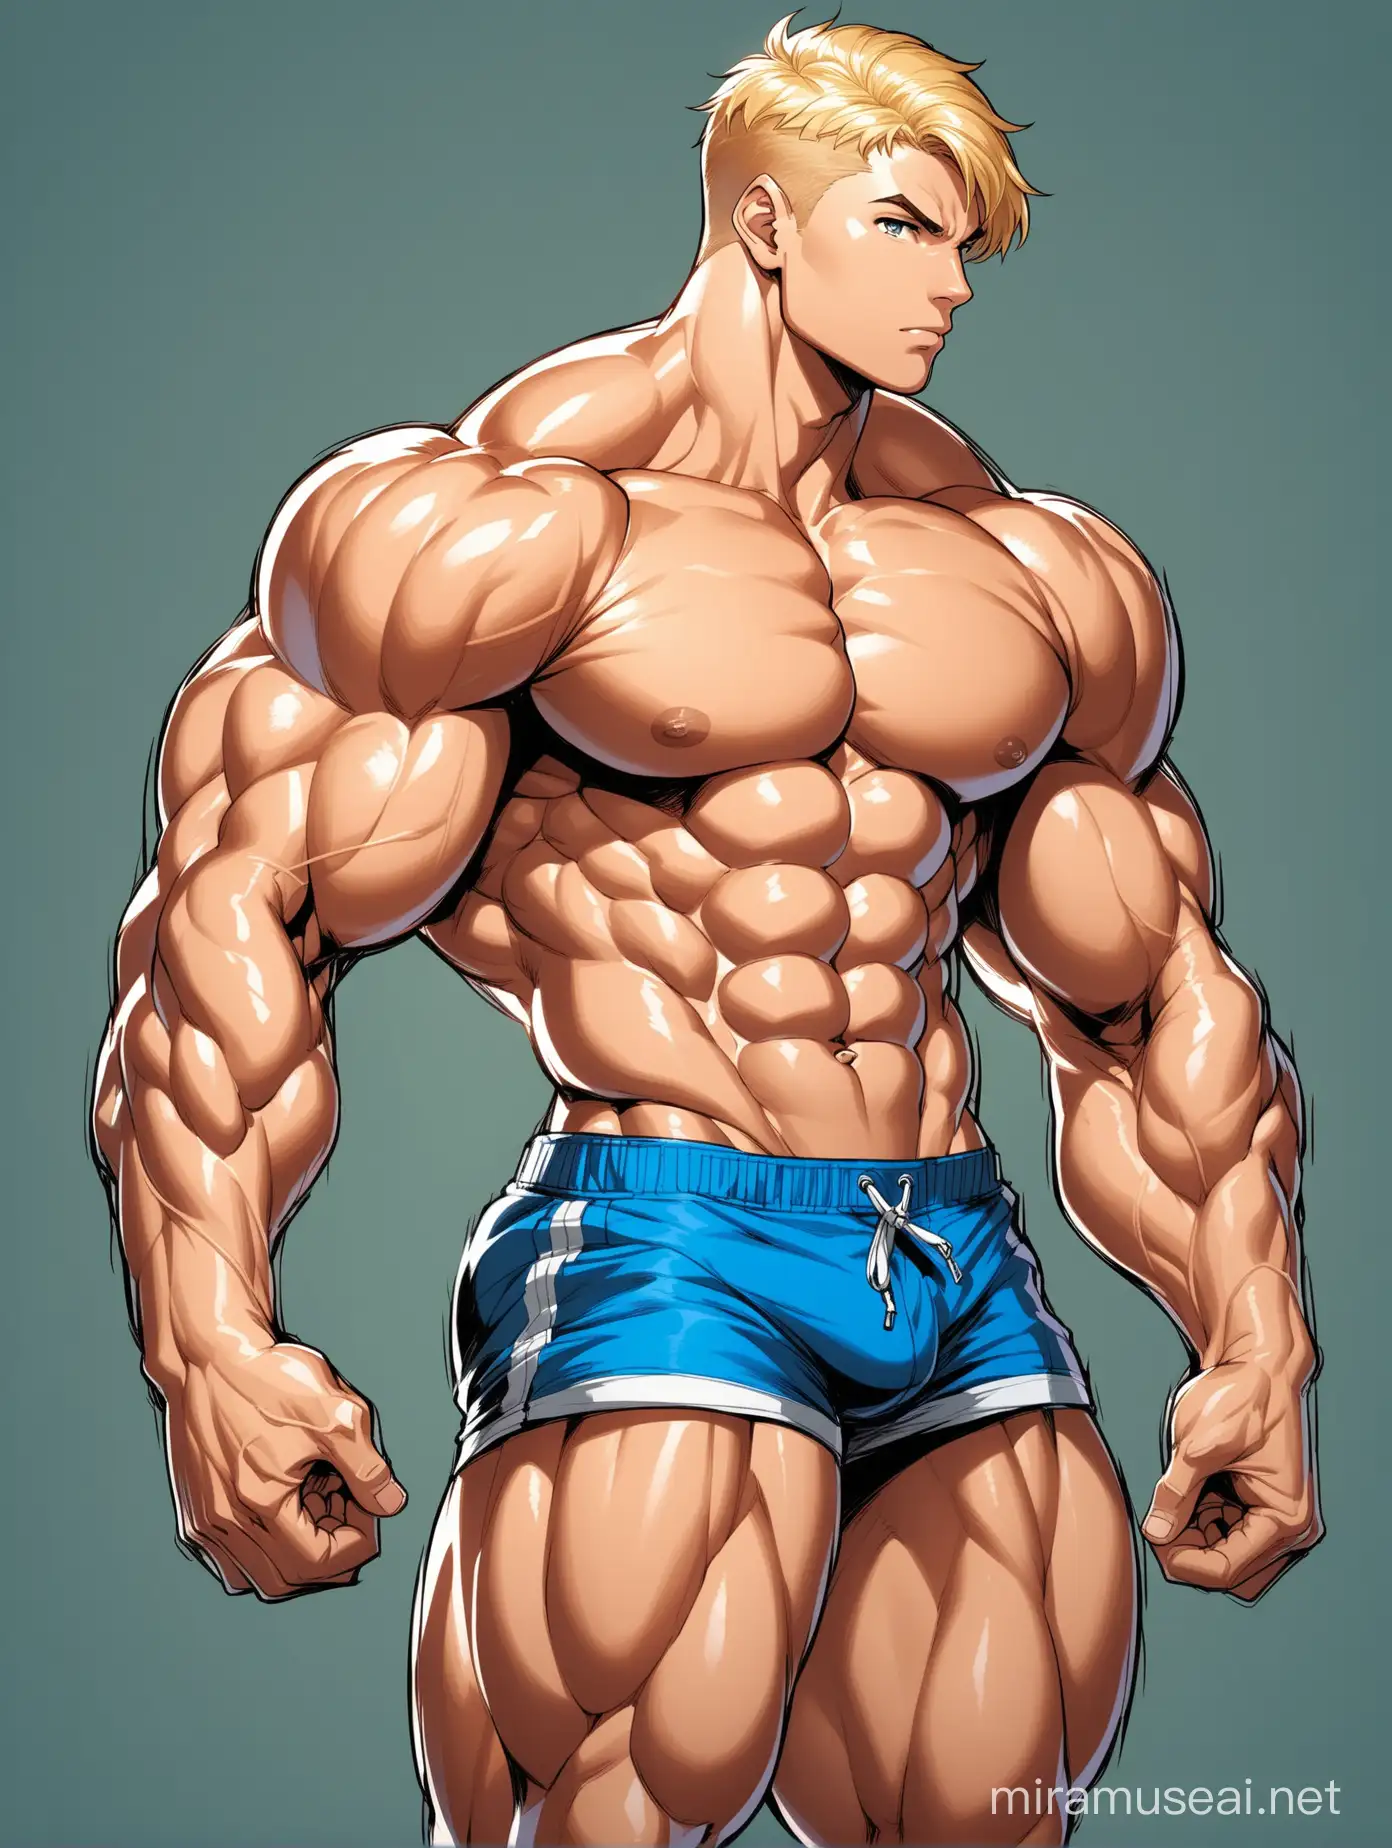 Powerful Teenage Male with Muscular Physique and Blond Hair